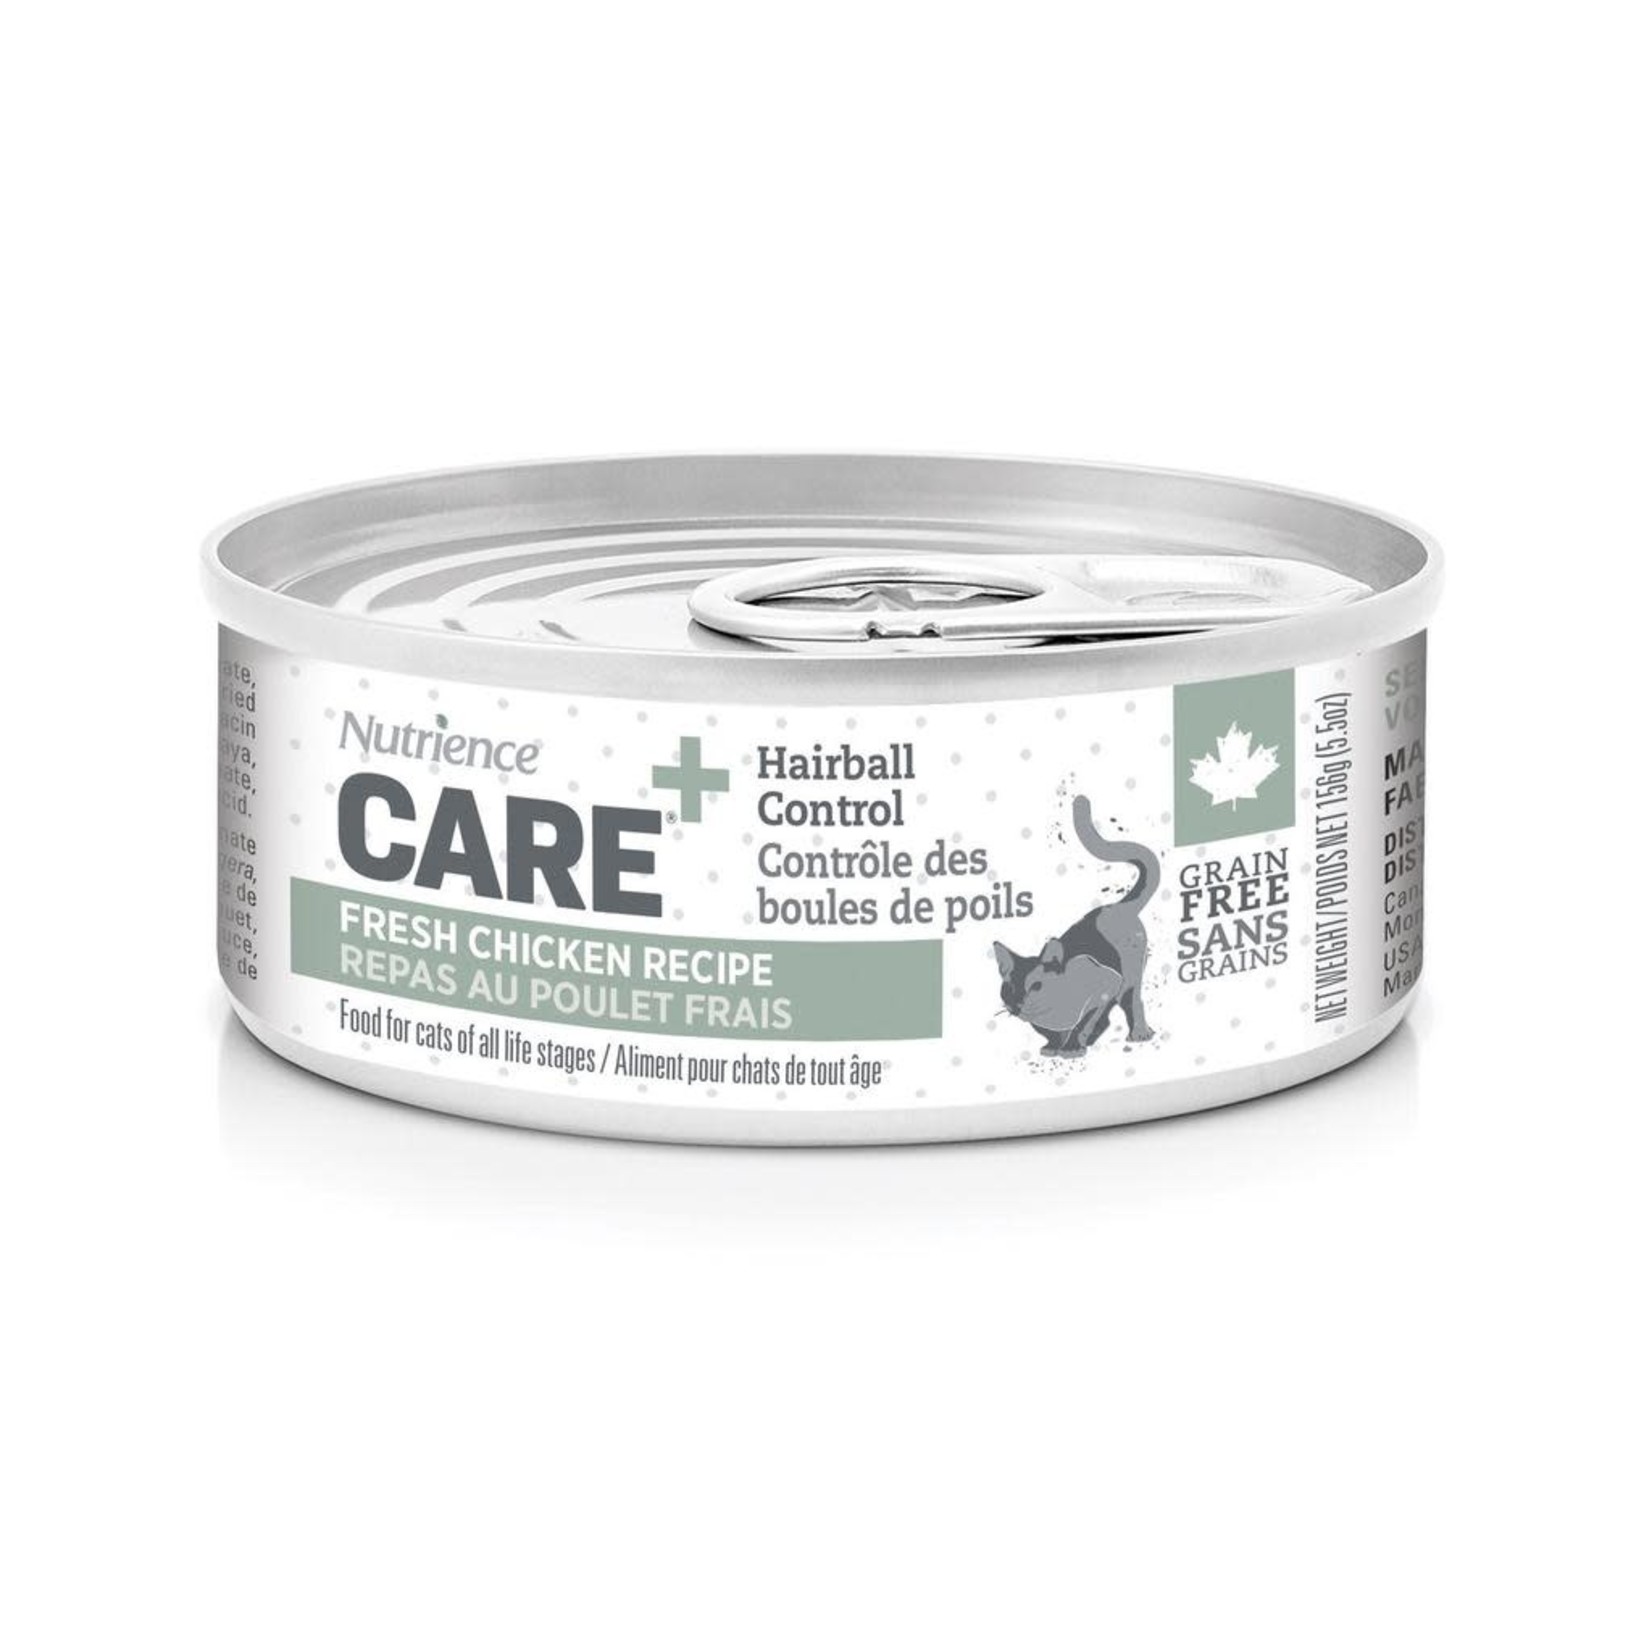 NUTRIENCE Nutrience Care Cat Hairball Control Can, 156g